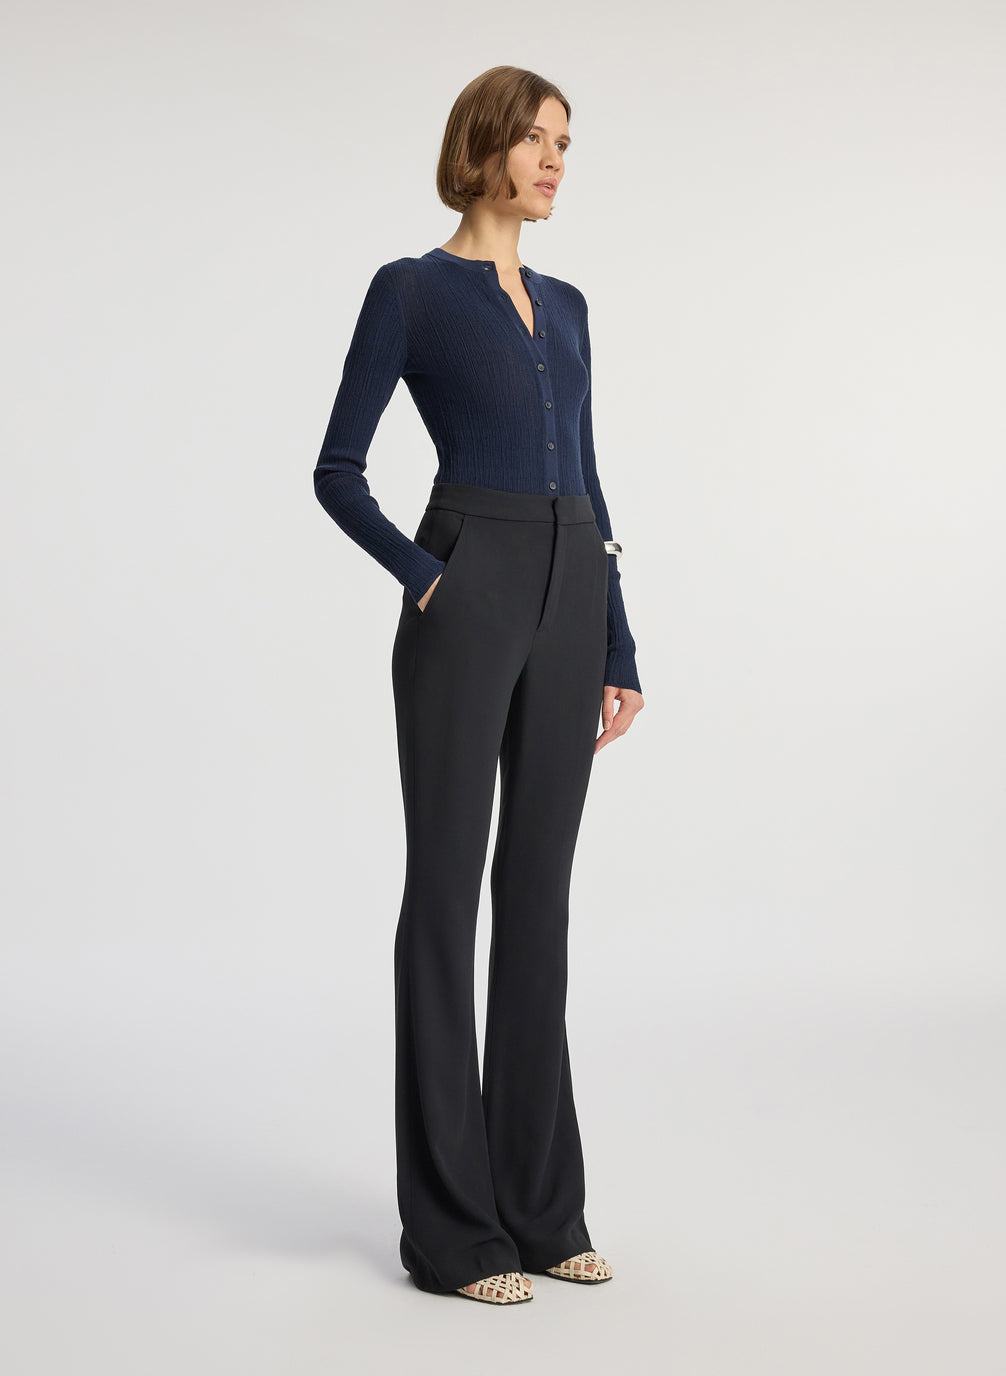 side view of woman wearing navy cardigan and black flared pants